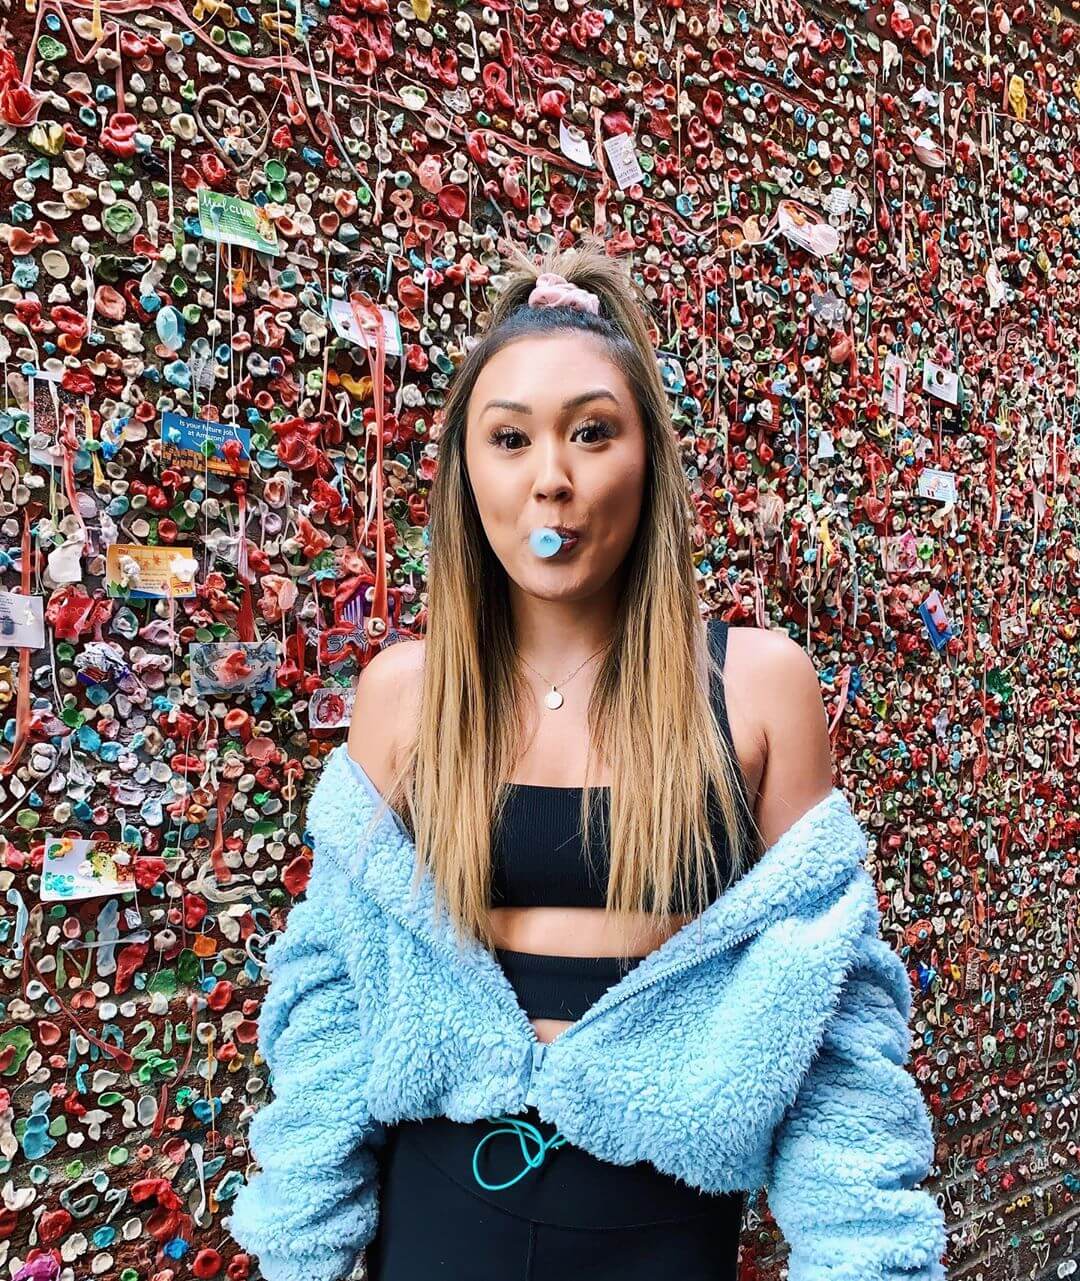 51 Hottest LaurDIY Big Butt Pictures Which Will Make You Swelter All Over 30